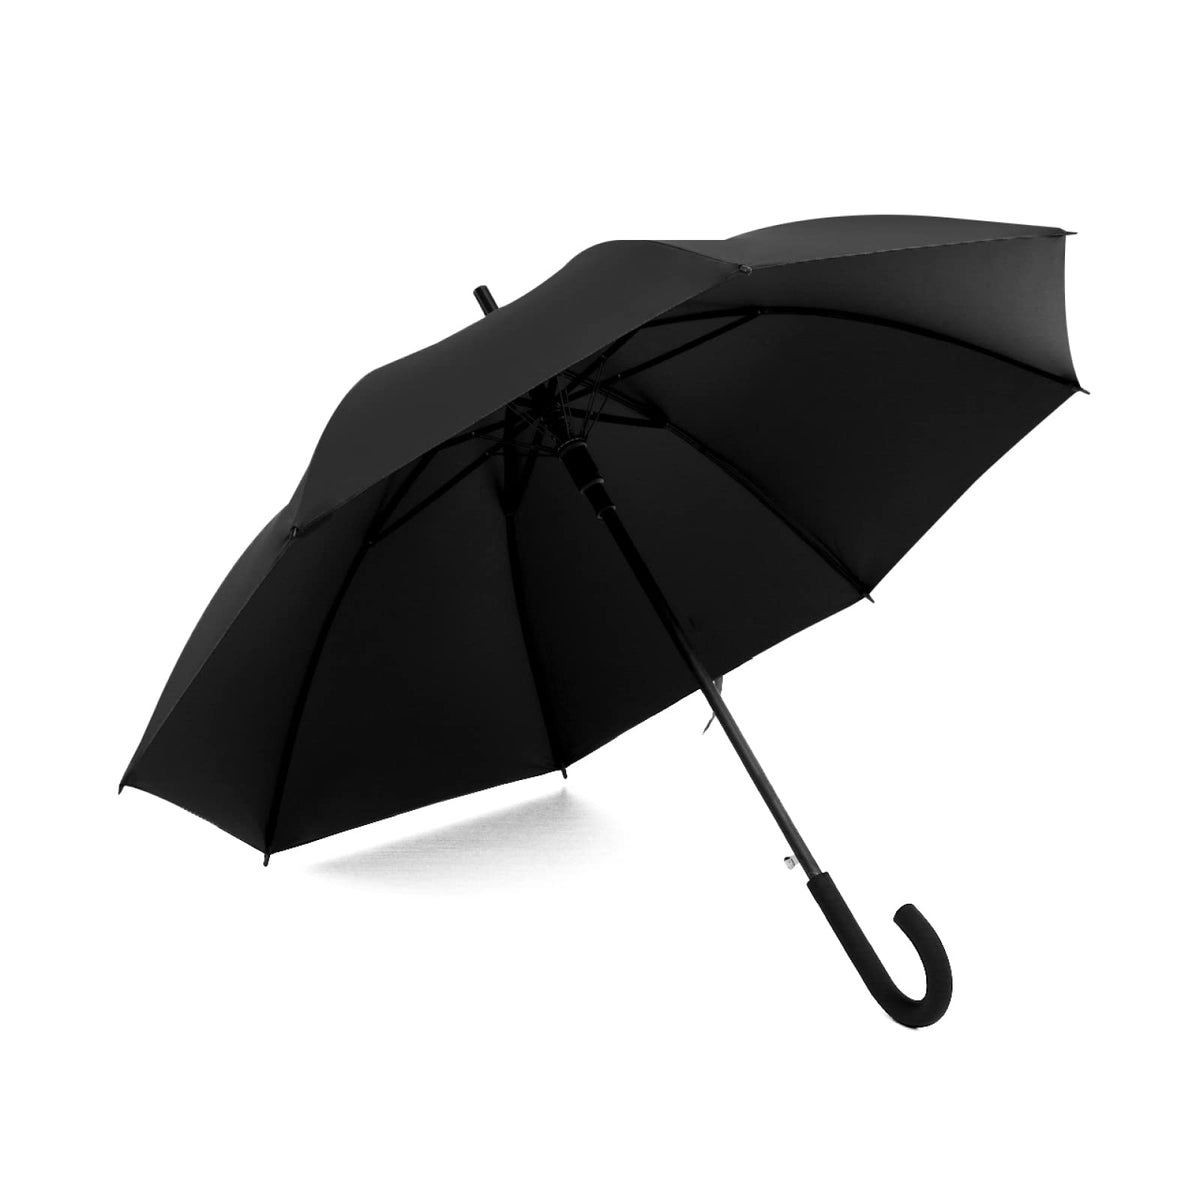 ABSORBIA Big Straight and Stick Umbrella for rain, Windproof, Waterproof and UV Coated, Open Diameter 105cm Double Layer Umbrella With Cover in Black Colour………